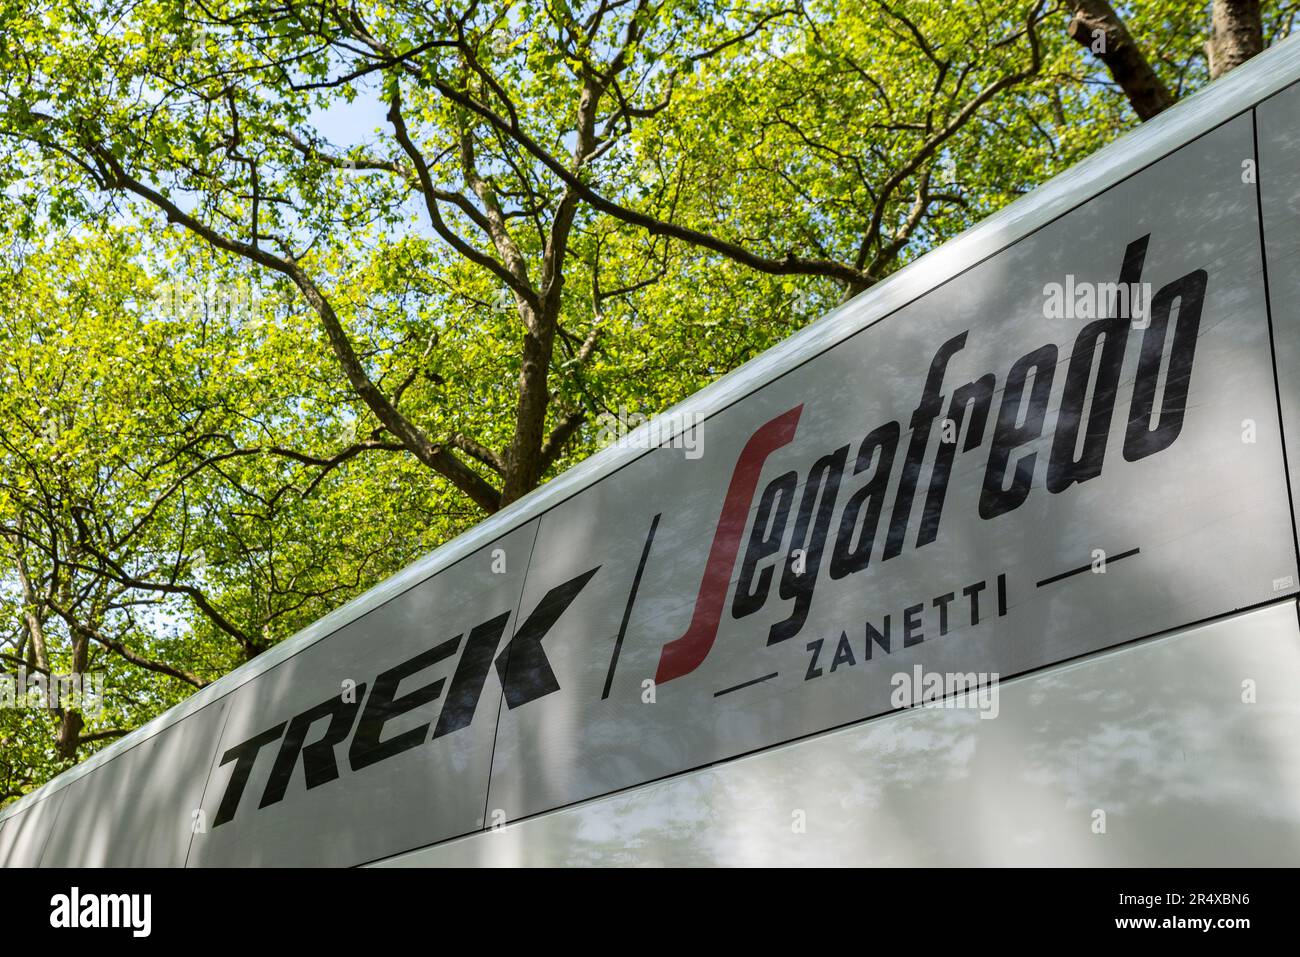 Trek Segafredo team support vehicle for the RideLondon Classique Stage 3 UCI Women's World Tour cycle race around roads in central London, UK. Stock Photo